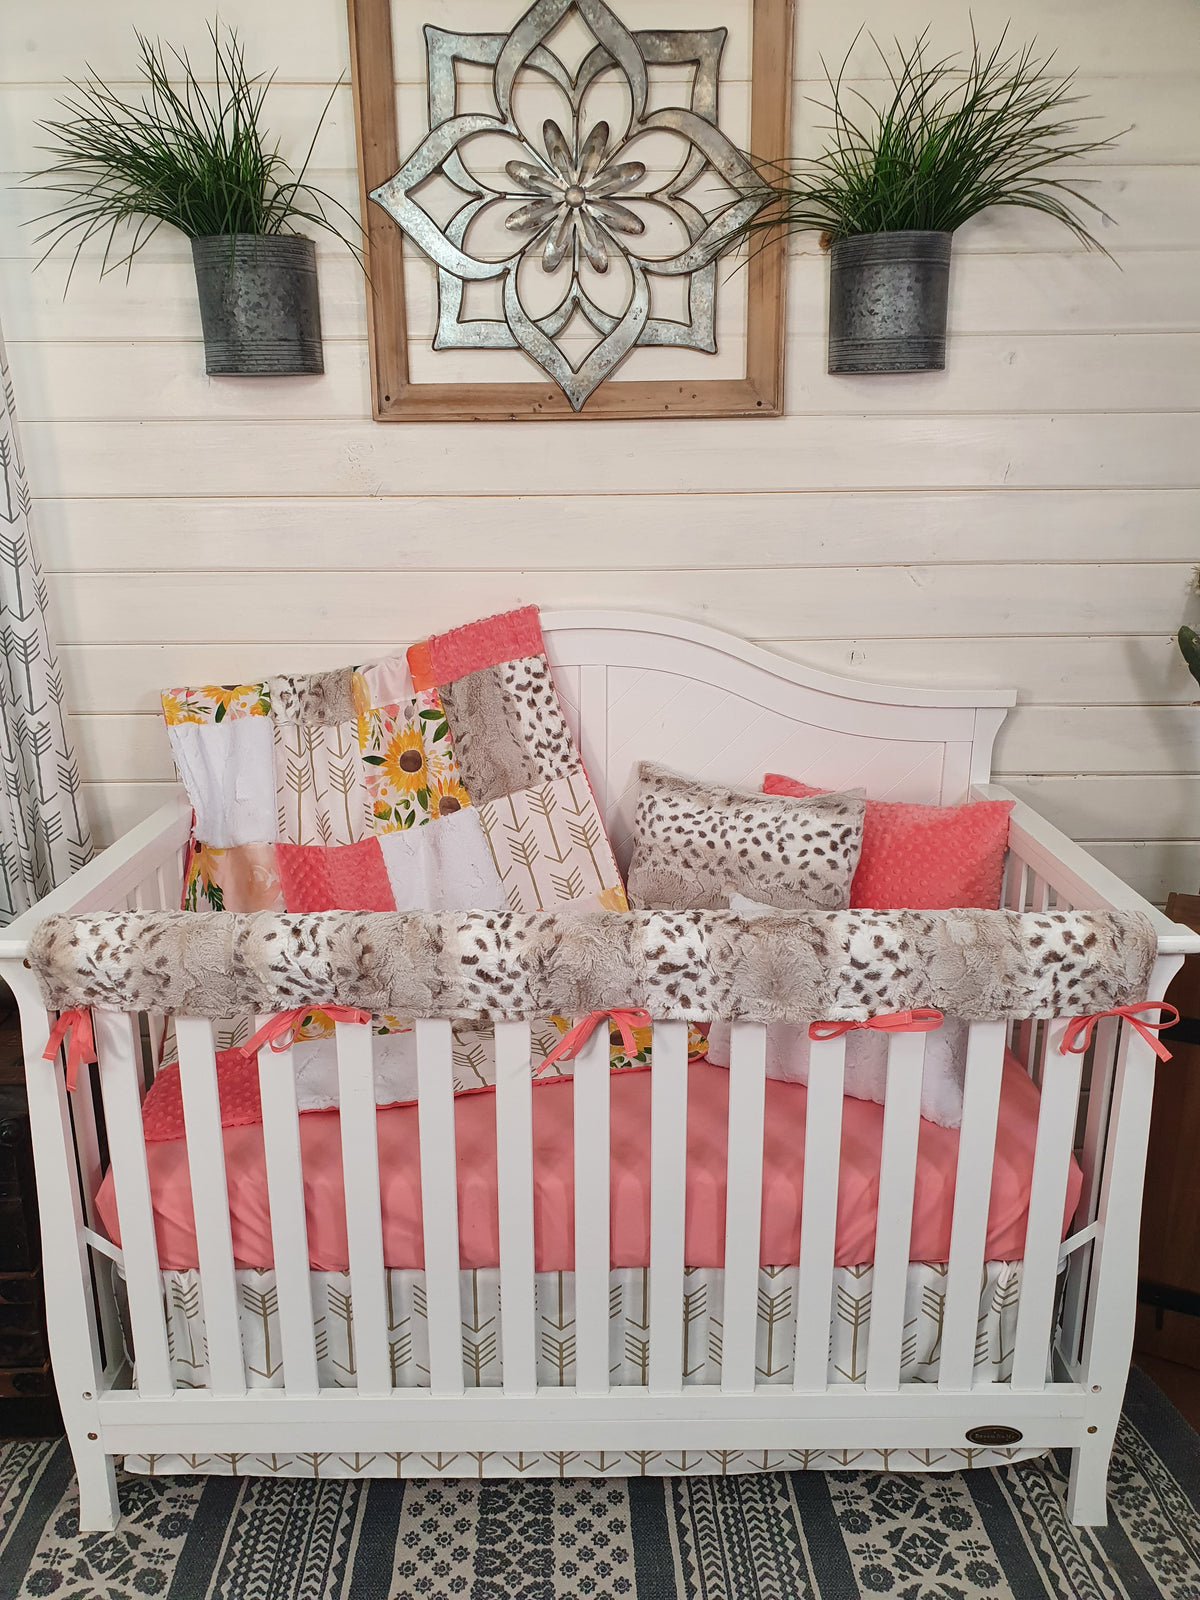 New Release Girl Crib Bedding- Sunflower and Lynx Minky Floral Baby Bedding &amp; Nursery Collection - DBC Baby Bedding Co 